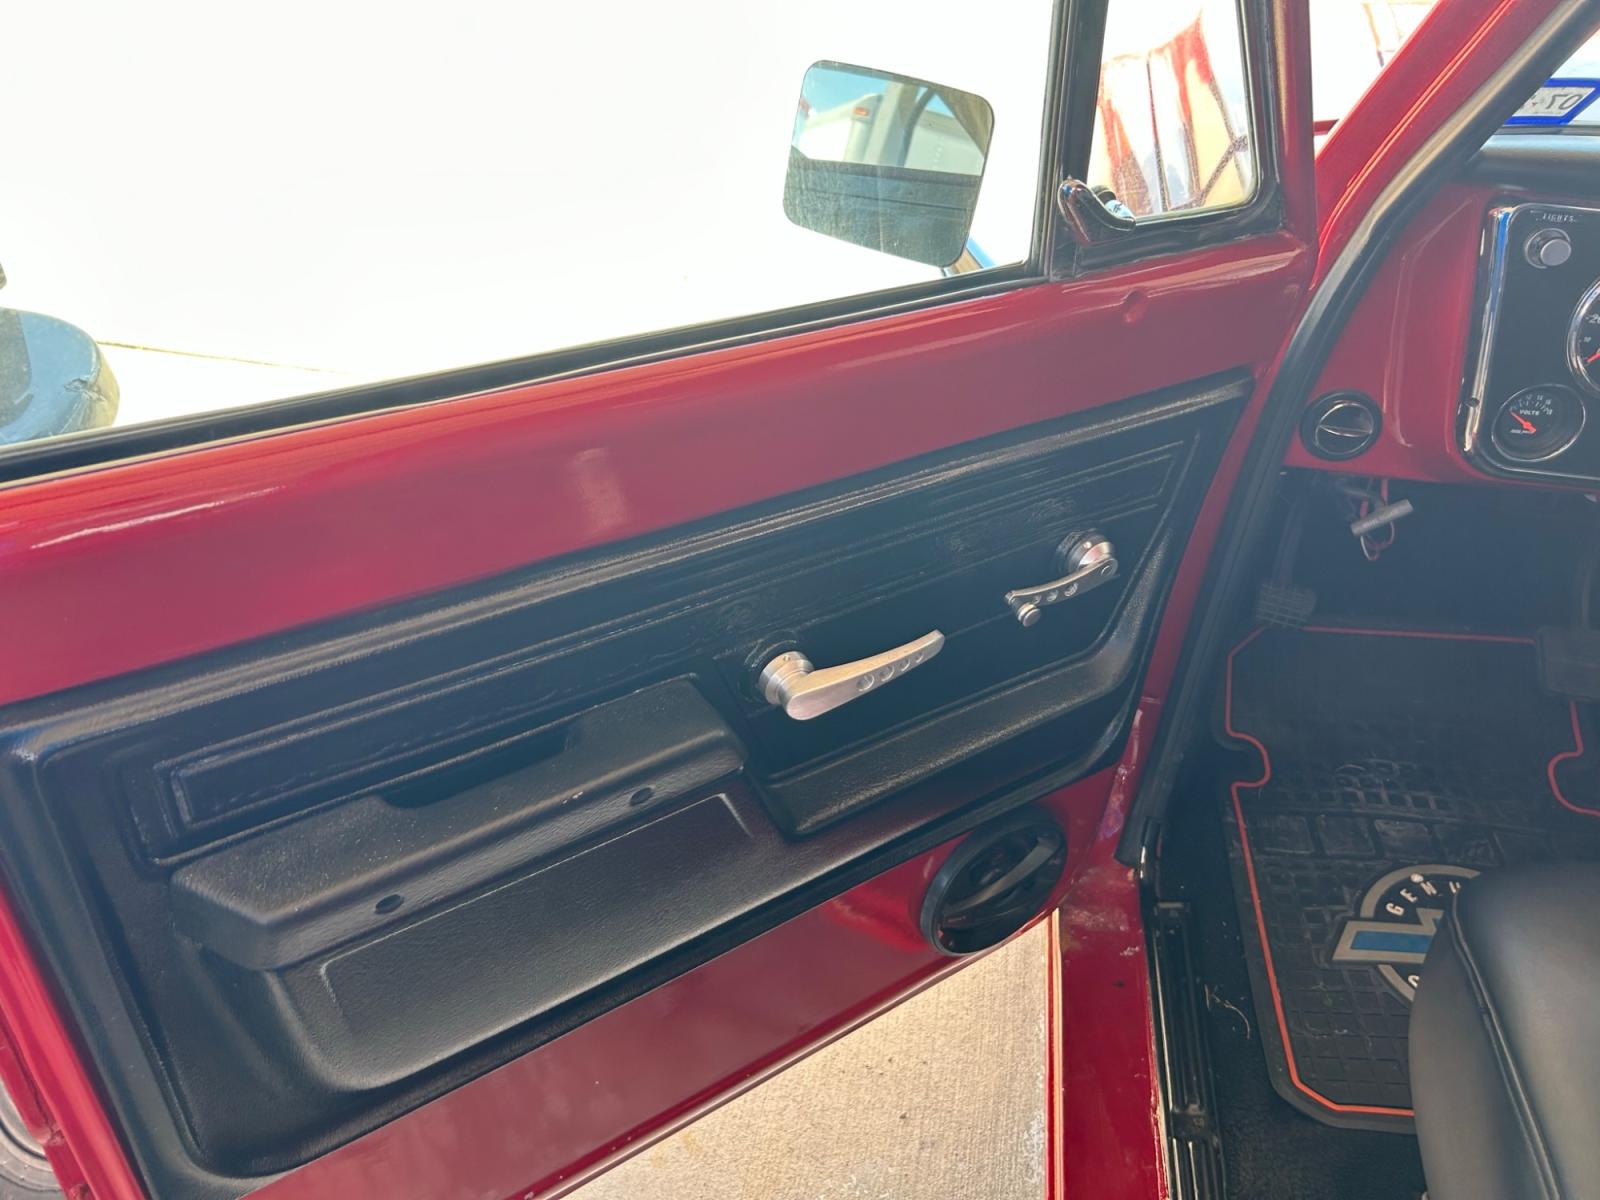 1972 Red Chevrolet C10 (CCE142A1201) , Automatic transmission, located at 1687 Business 35 S, New Braunfels, TX, 78130, (830) 625-7159, 29.655487, -98.051491 - 580 Horse Power - Photo #13